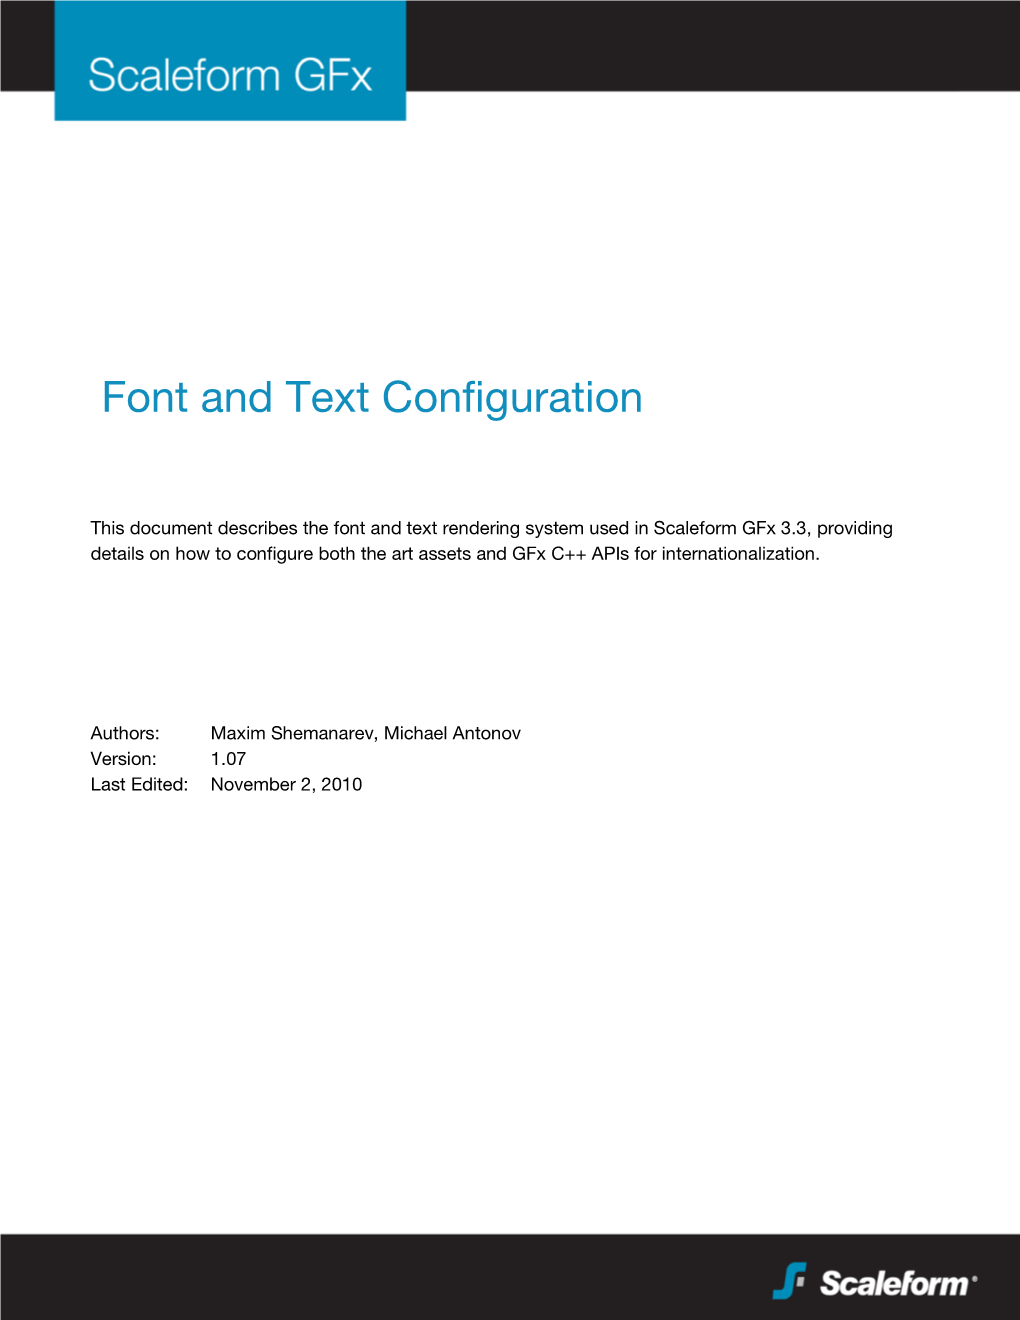 Font and Text Configuration